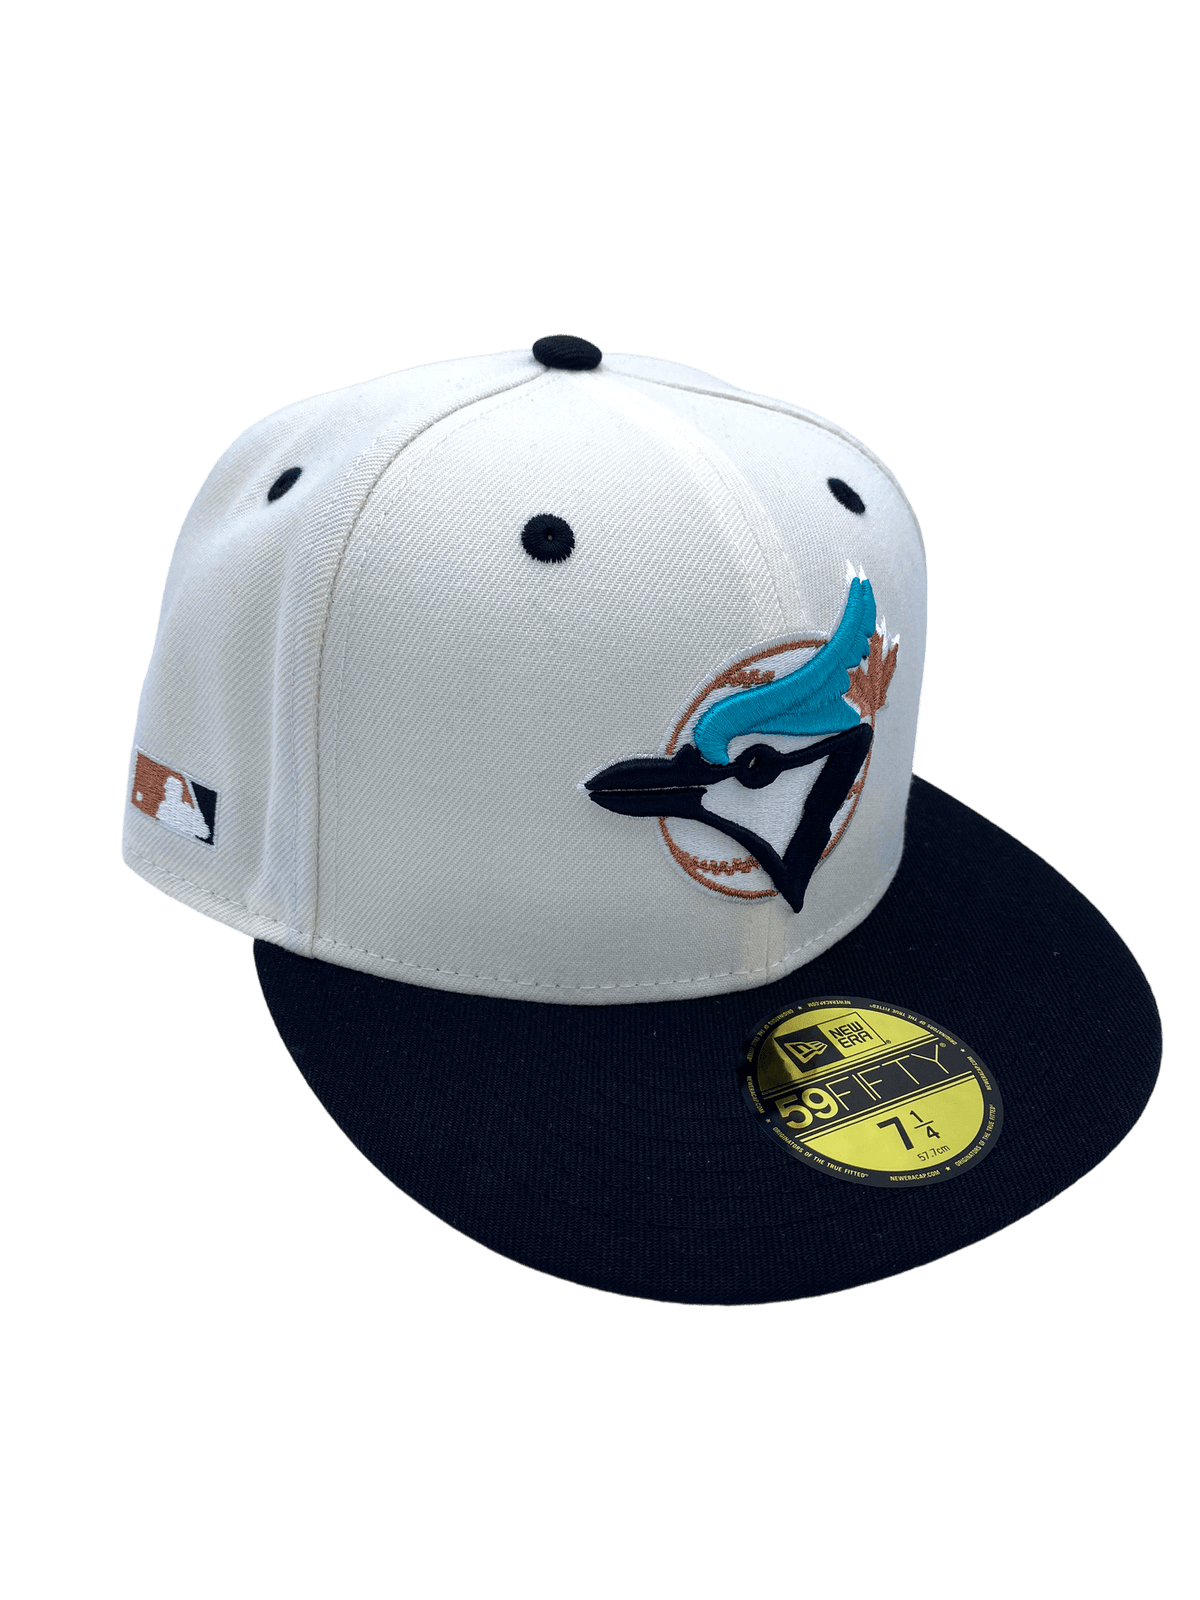 Toronto Blue Jays New Era Black & White Low Profile 59FIFTY Fitted Hat